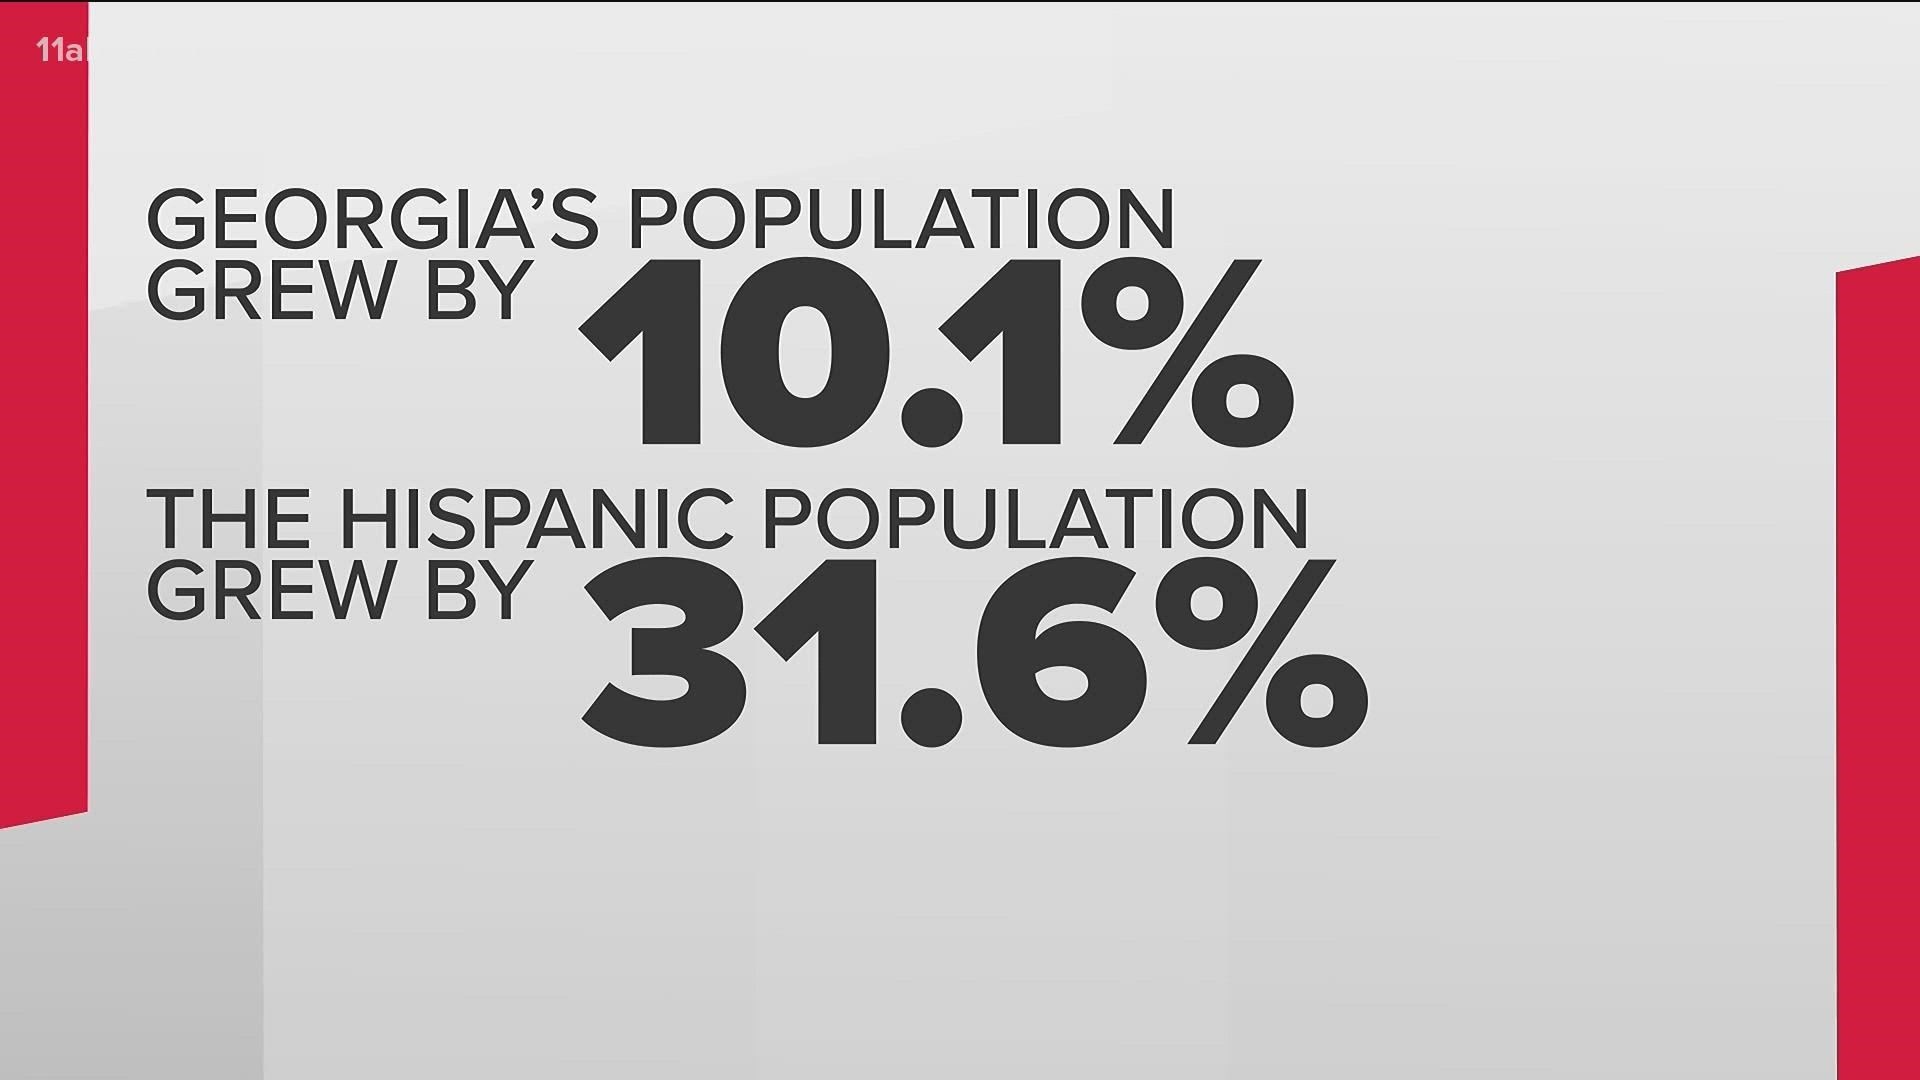 While the Hispanic community in Georgia grew by more than 31% in the past decade, experts believe the numbers could be undercounted due to the pandemic.